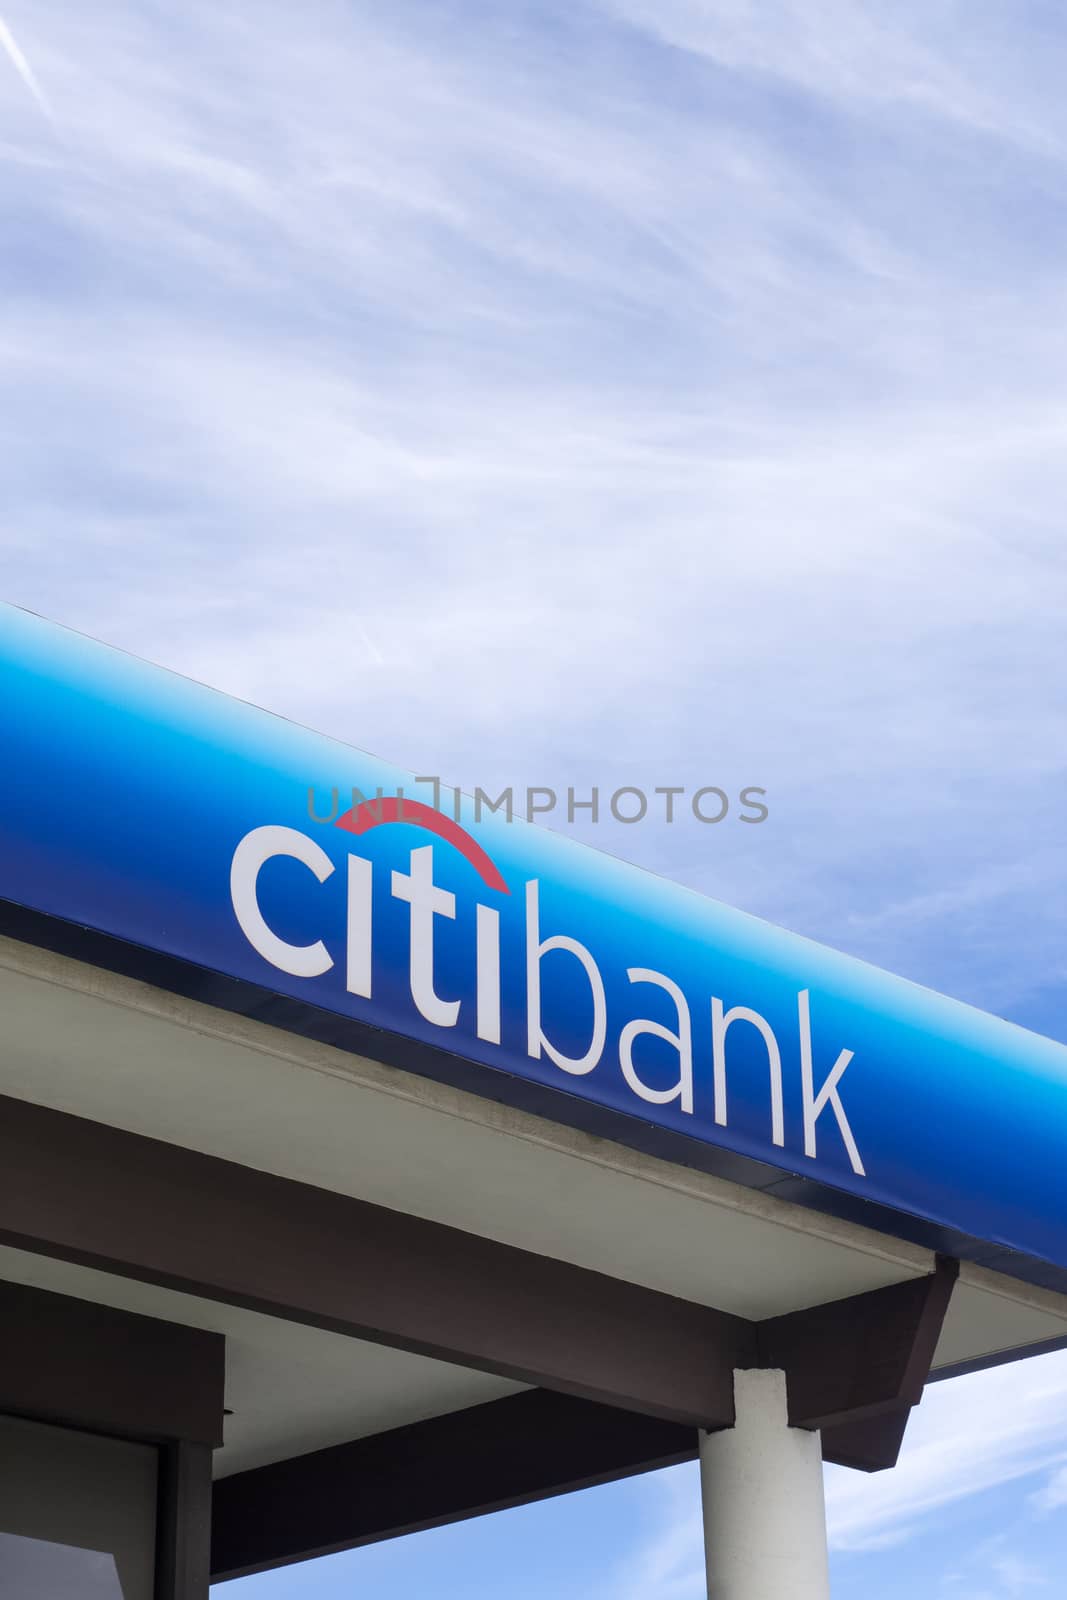 CANYON COUNTRY, CA/USA - DECEMBER 14, 2014: Citibank bank exterior and sign. Citibank is the consumer banking division of financial services multinational Citigroup.